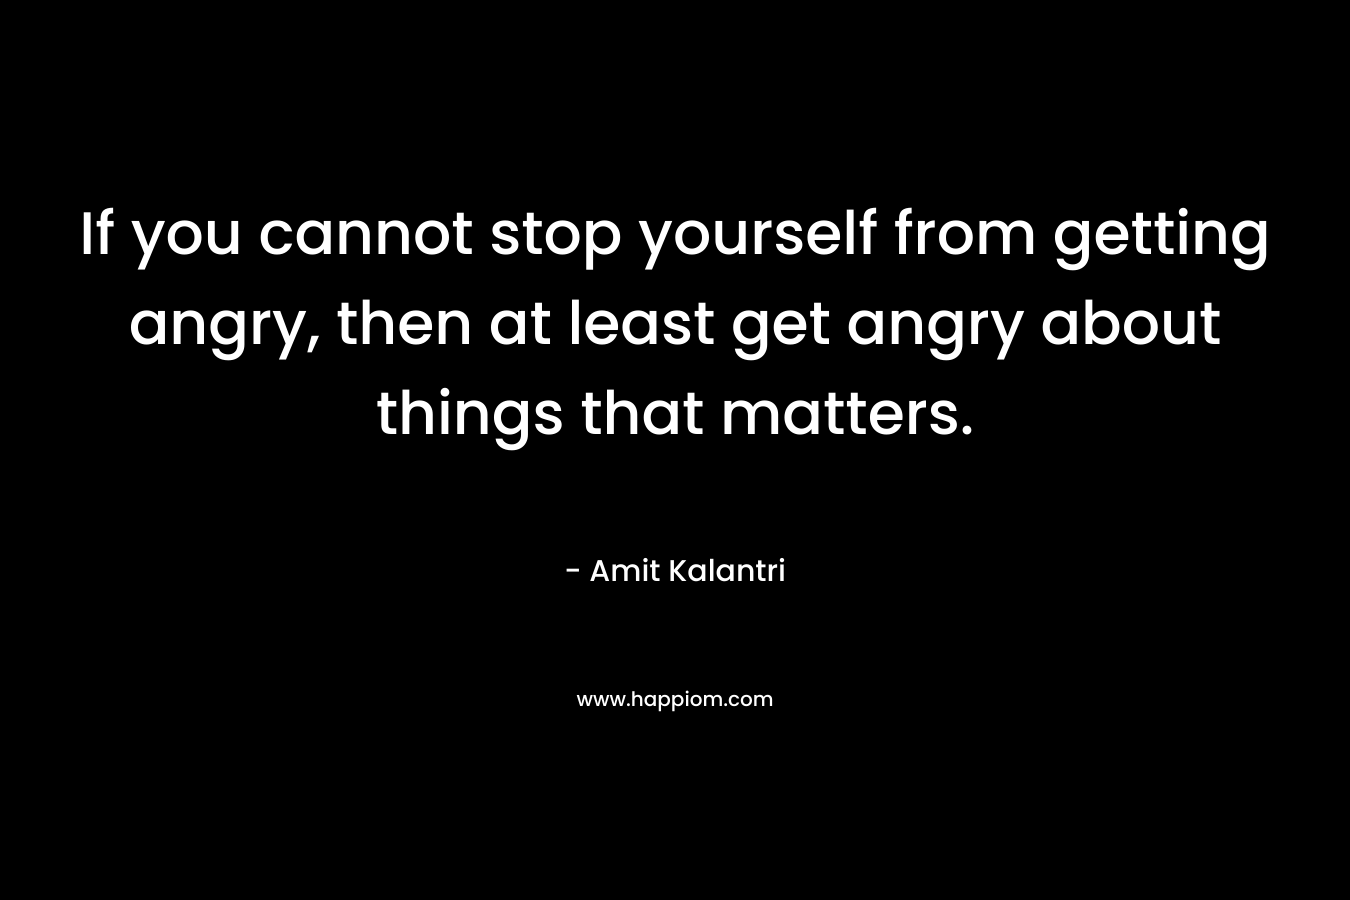 If you cannot stop yourself from getting angry, then at least get angry about things that matters.